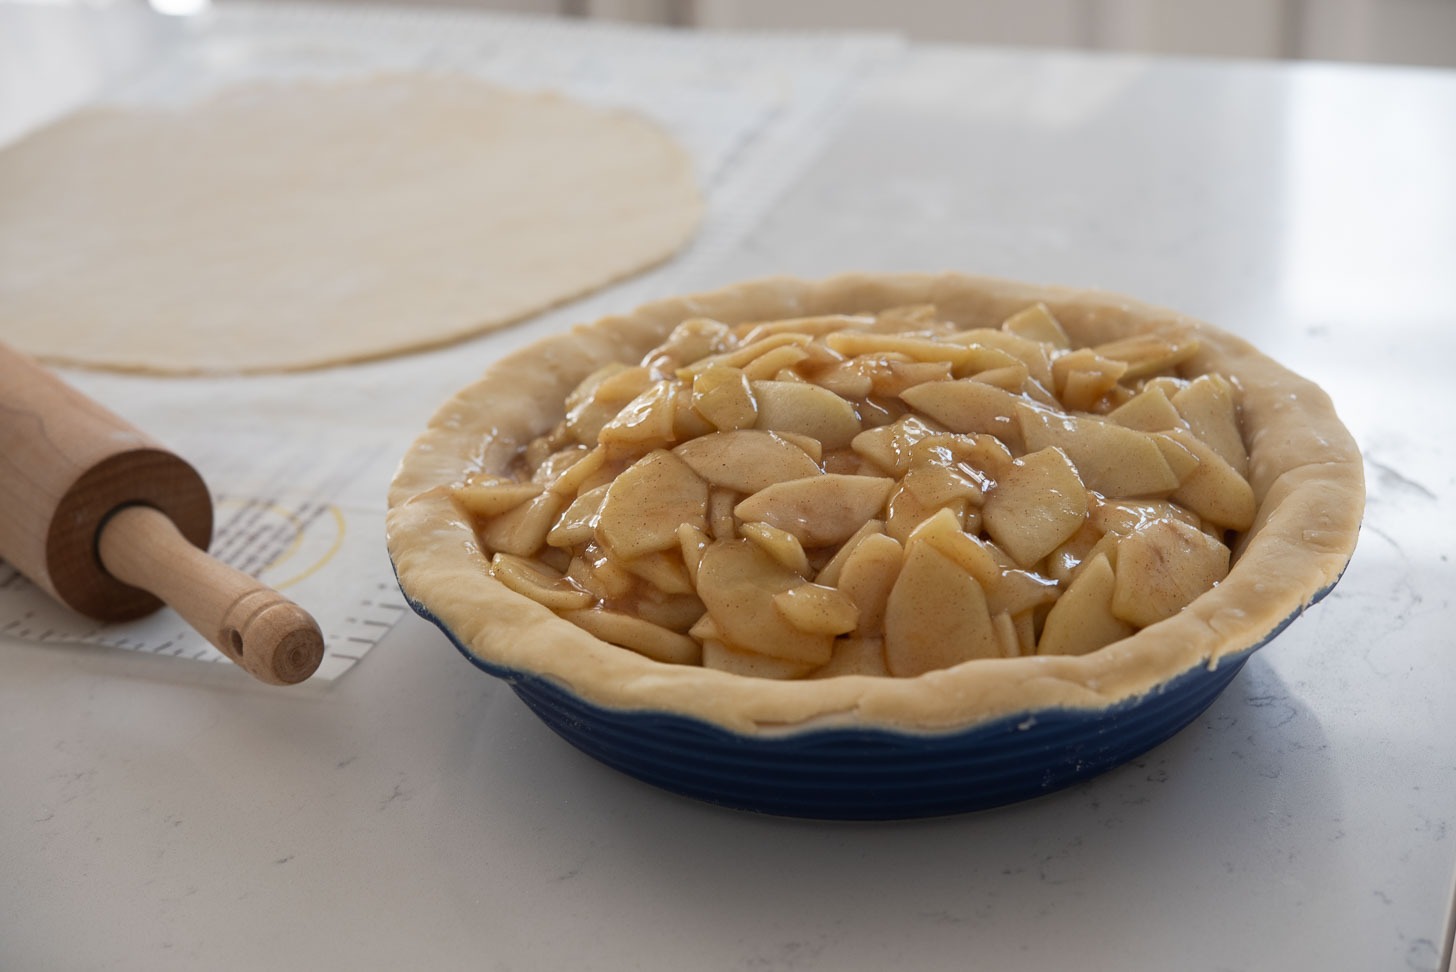 Cooked apple pie filling is placed on a pie crust in a pan.